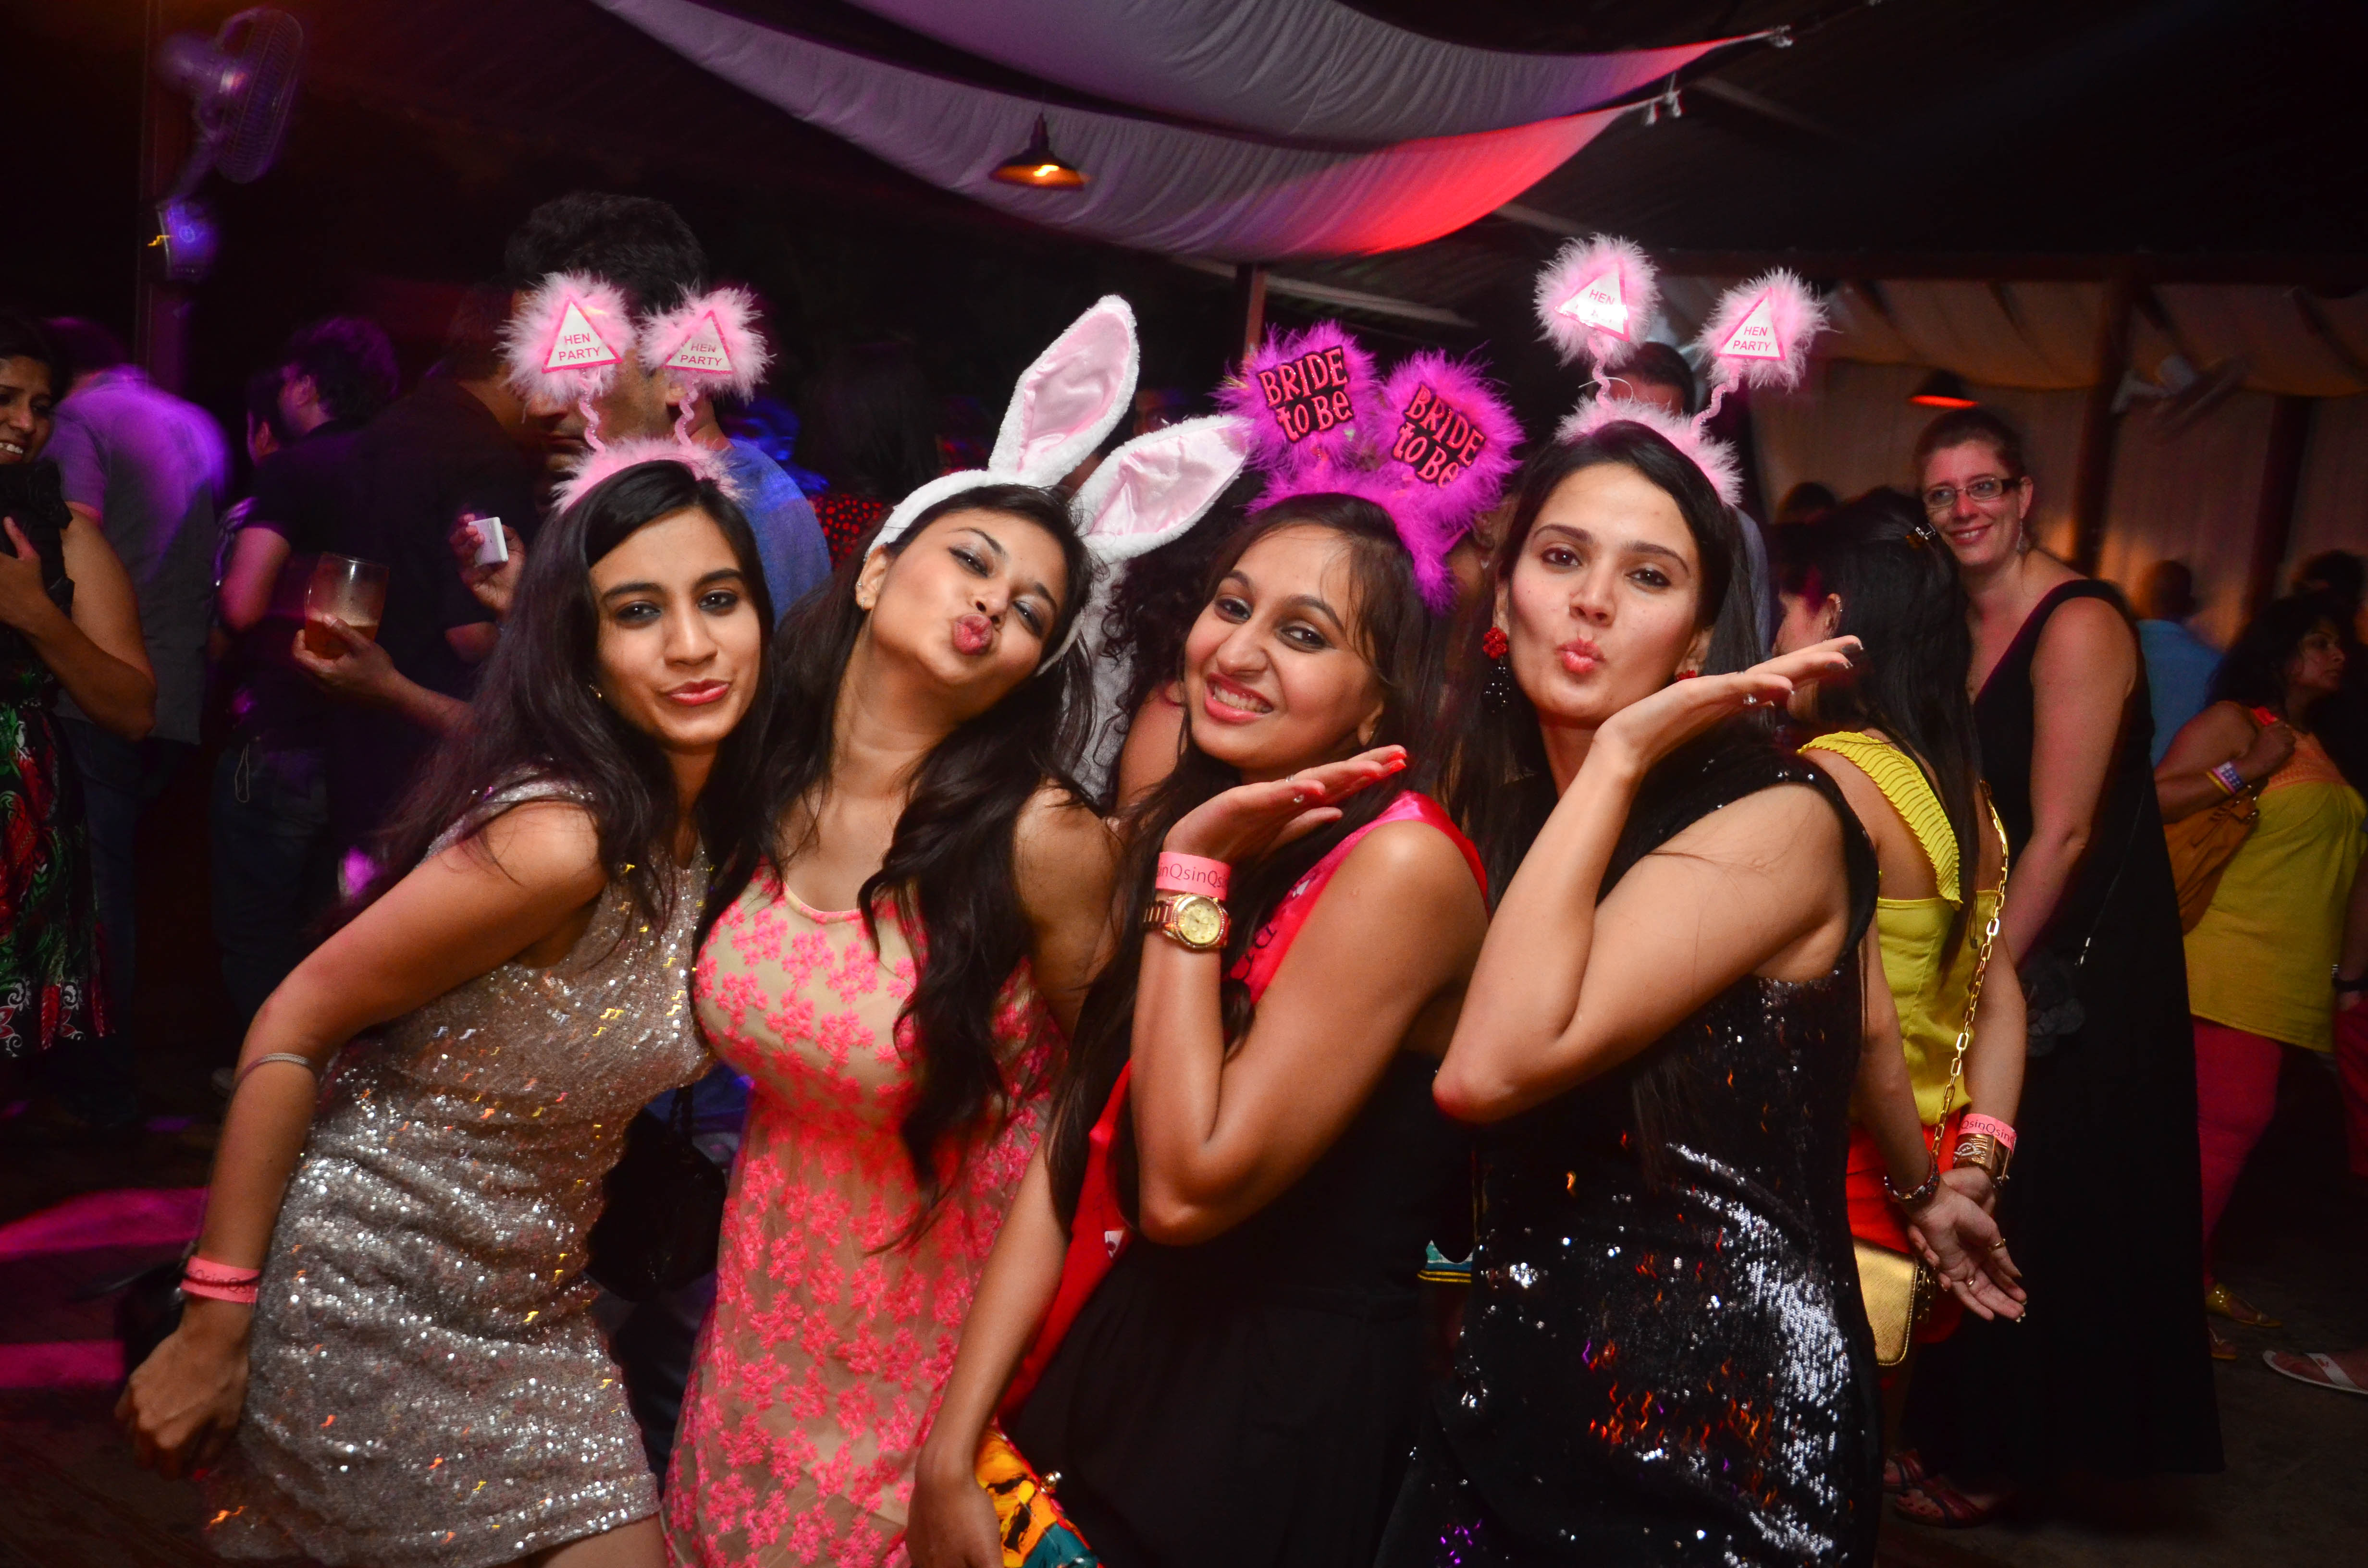 Party in one of the clubs in goa.